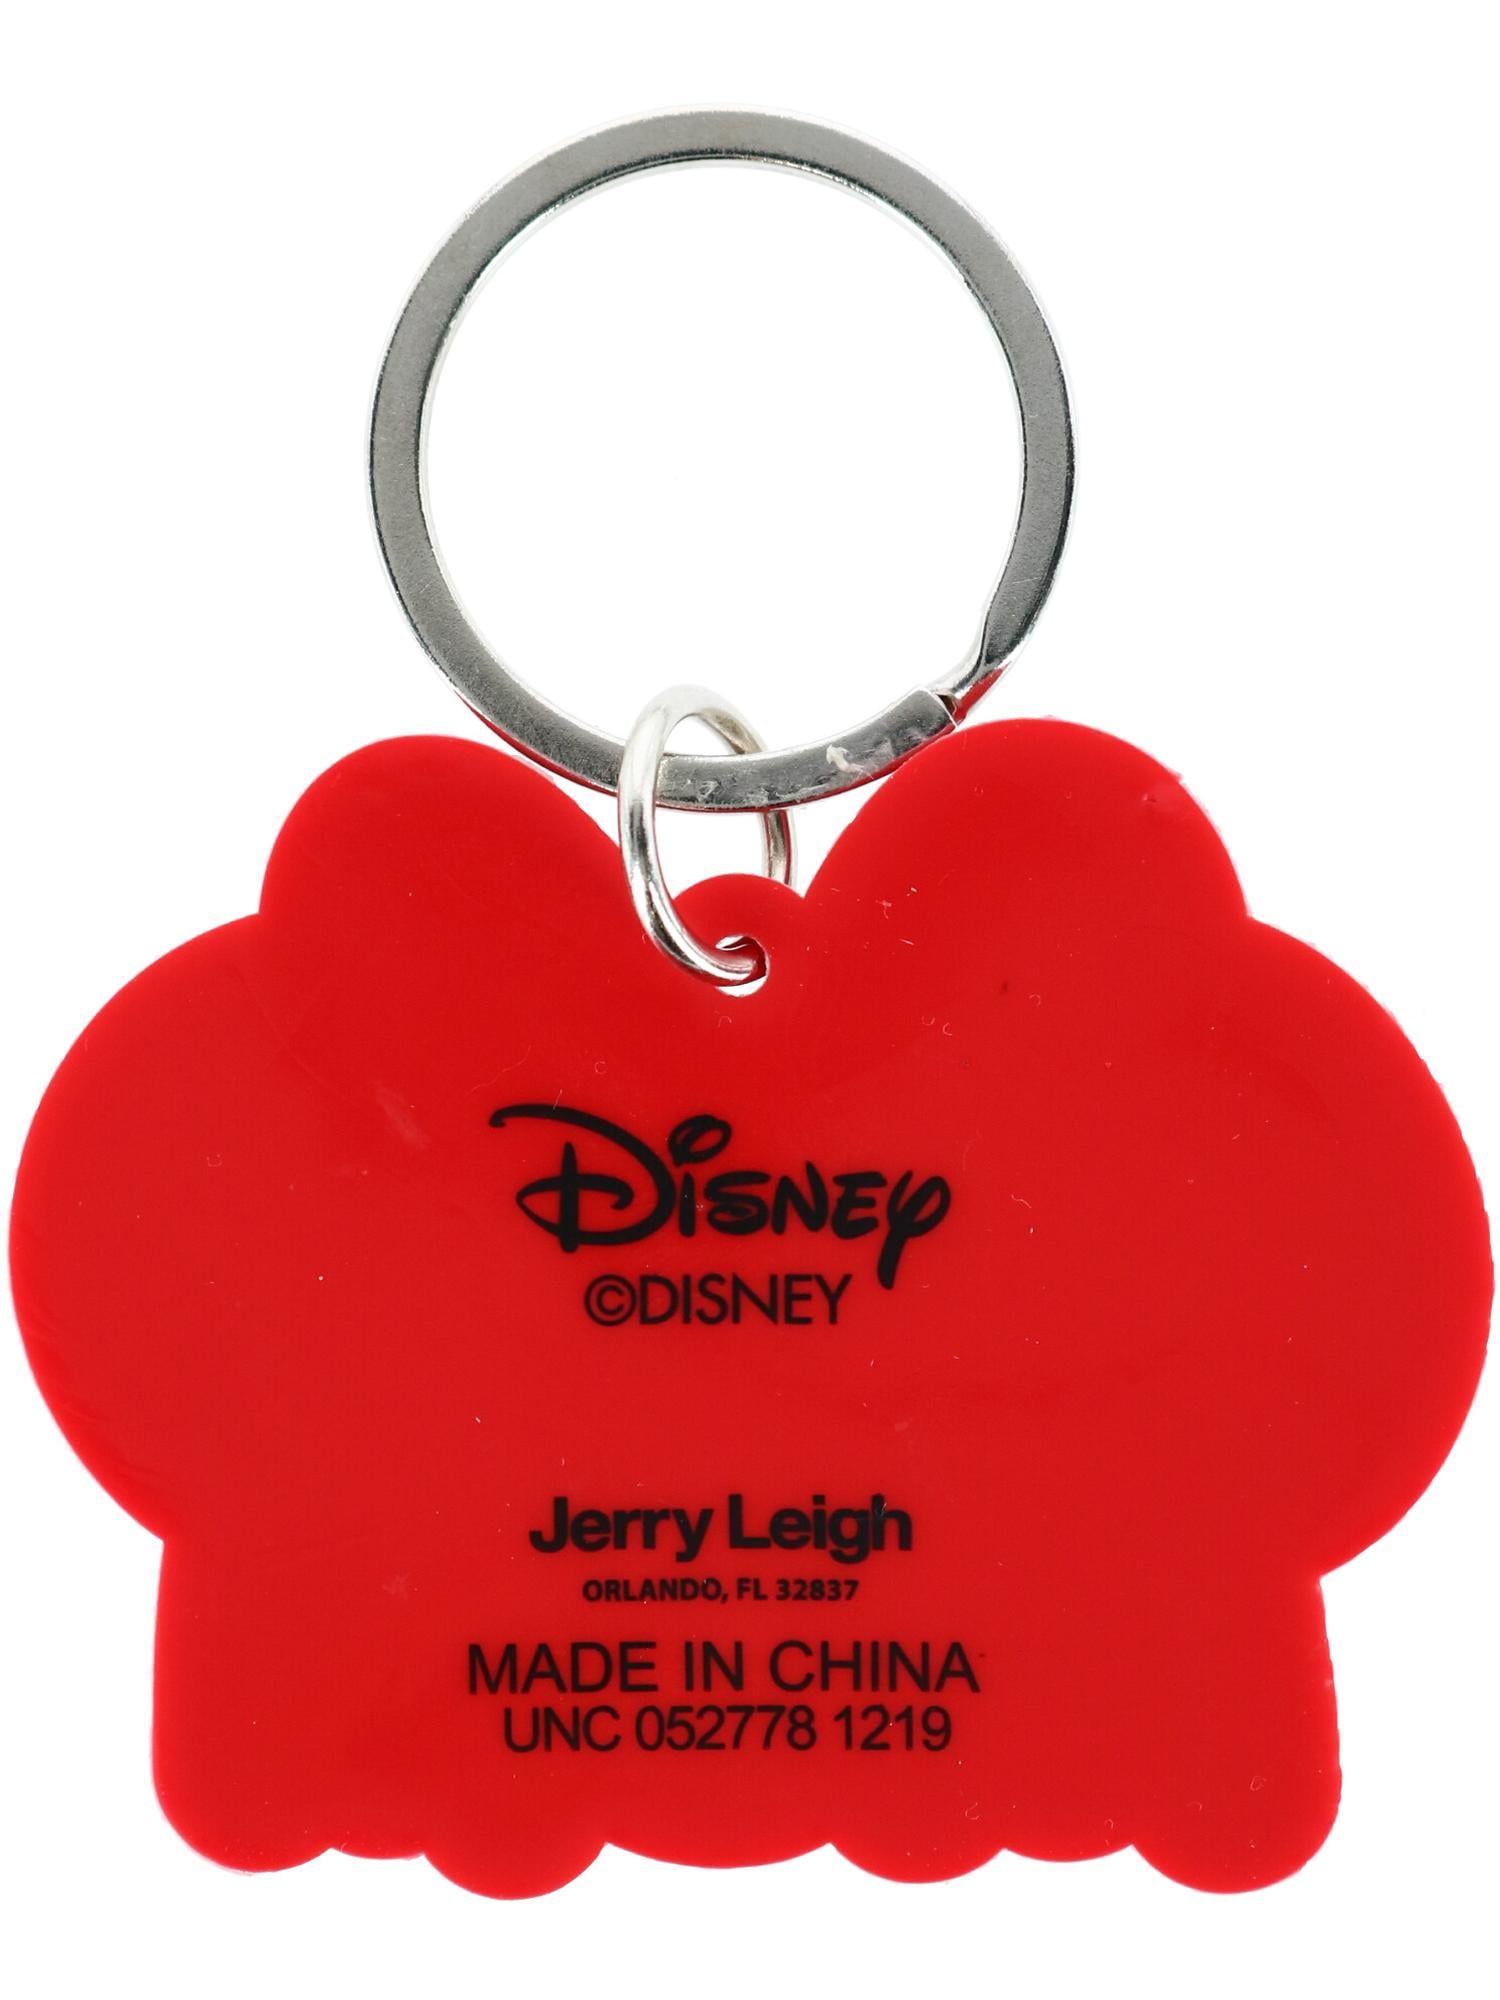 DISNEY MERCHANDISE NEW TAGS RUBBER KEYCHAIN FEATURING MICKEY BY JERRY LEIGH 